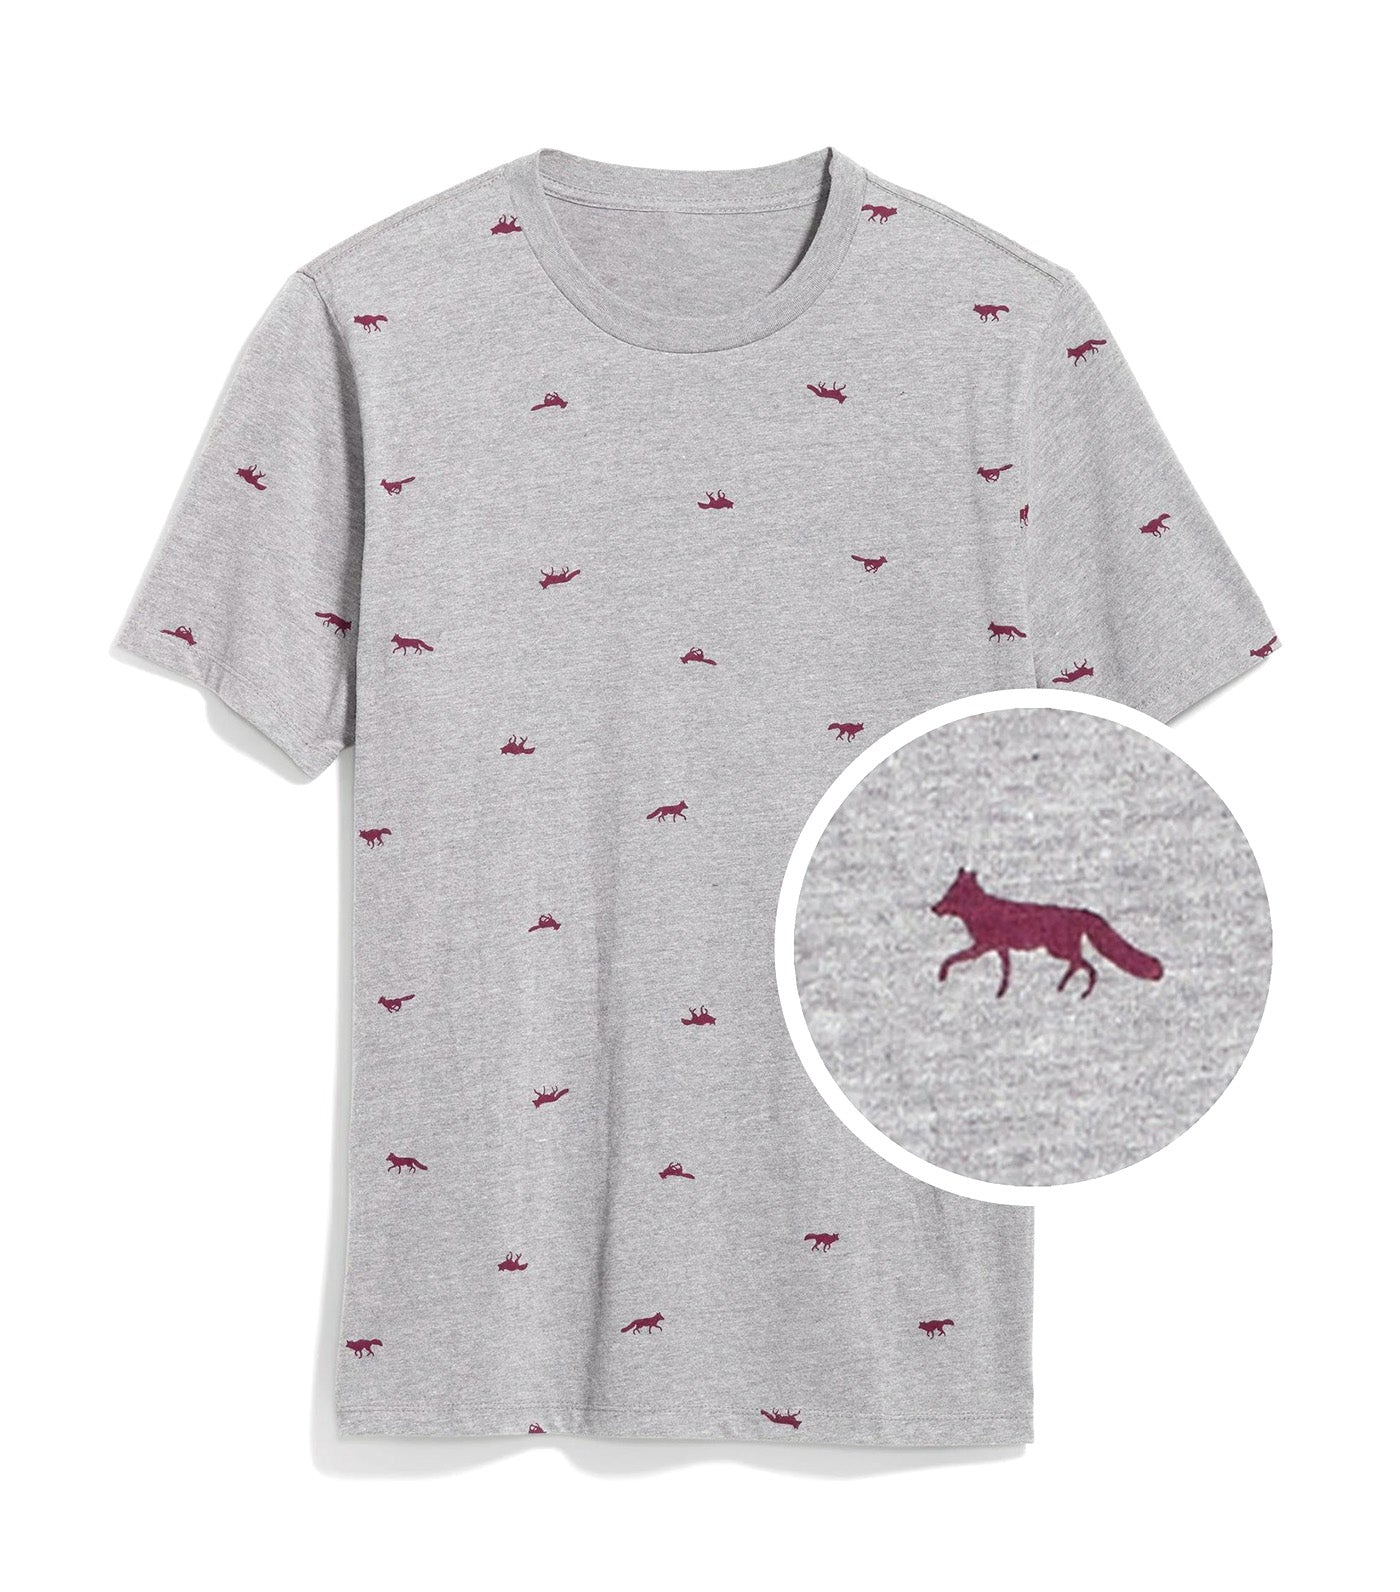 Soft-Washed Printed Crew-Neck T-Shirt for Men Foxes